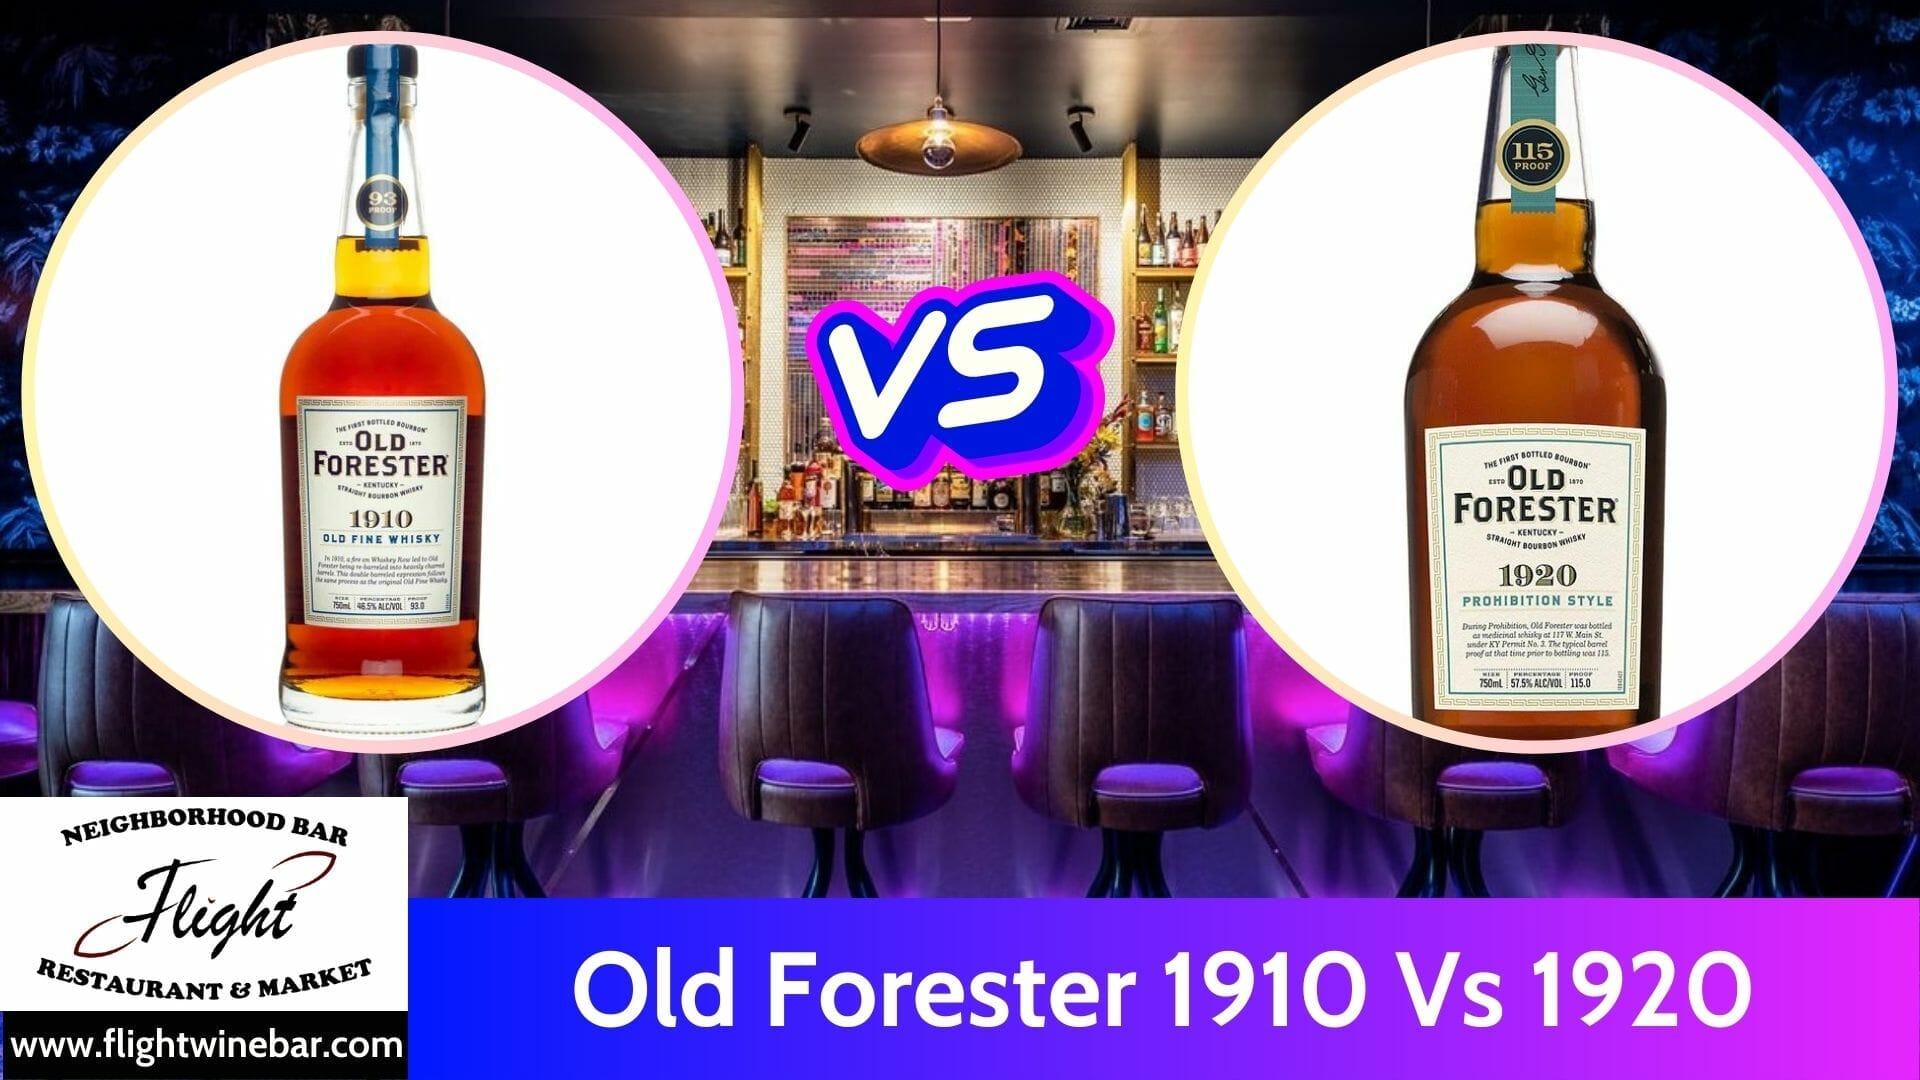 Old Forester 1910 Vs 1920